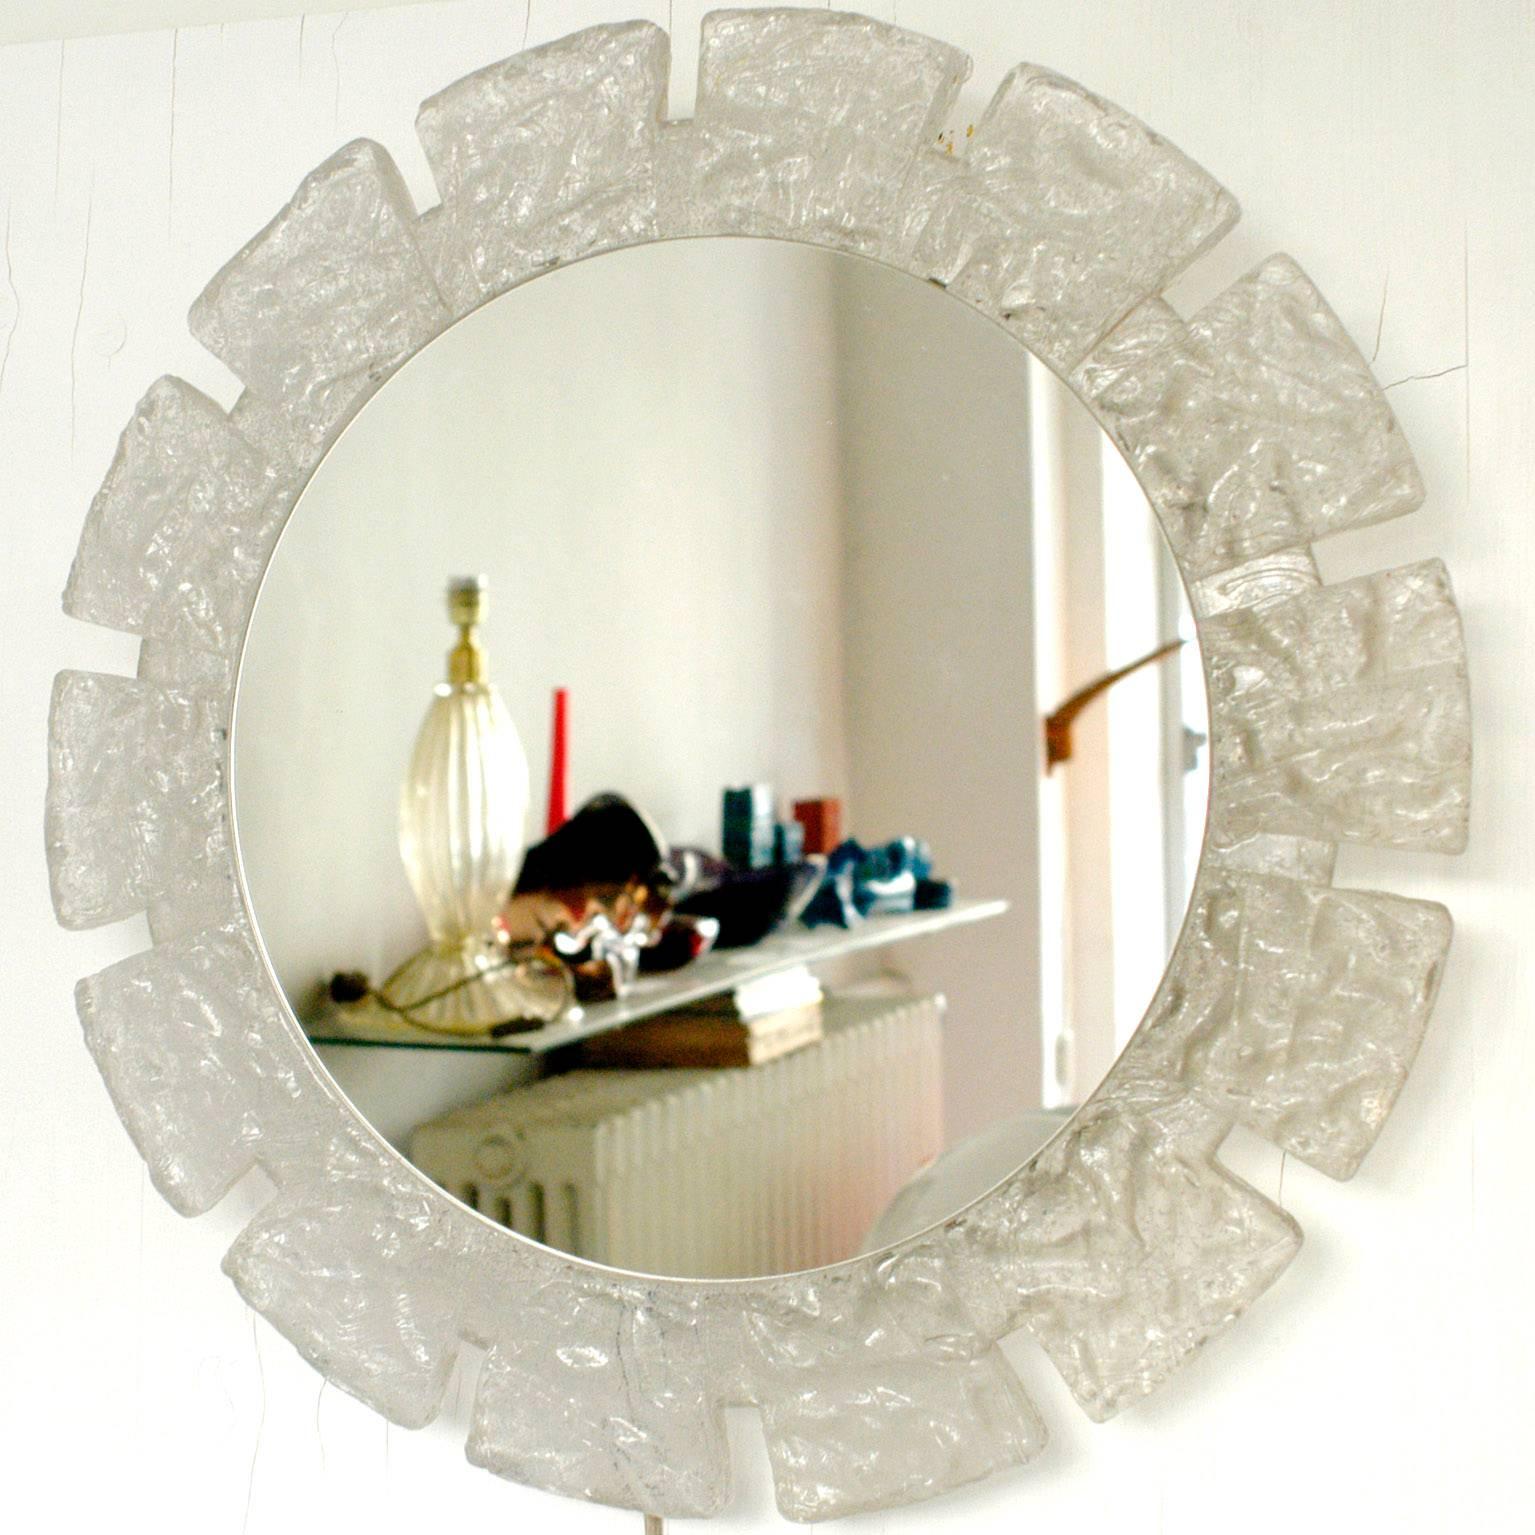 Stylish Round illuminated acrylic wall mirror in excellent condition.